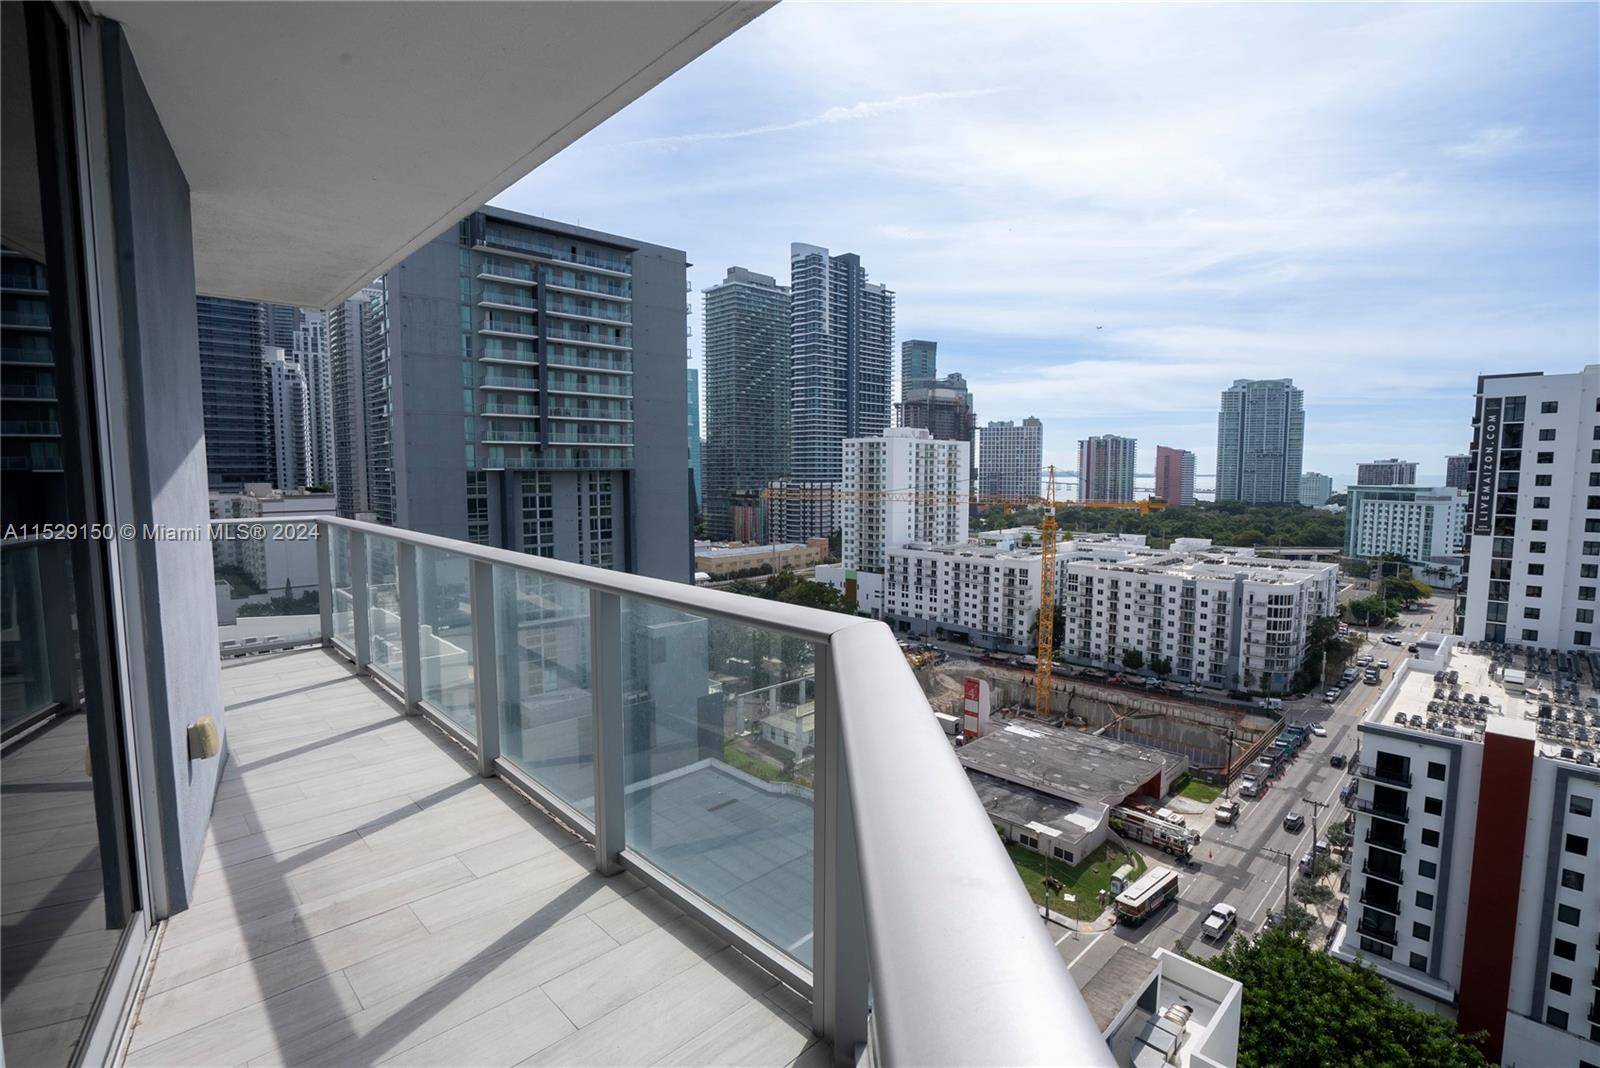 Presenting an unparalleled opportunity to acquire a sophisticated 3 bedroom, 3 bathroom unit in the heart of Miami's iconic Brickell district.